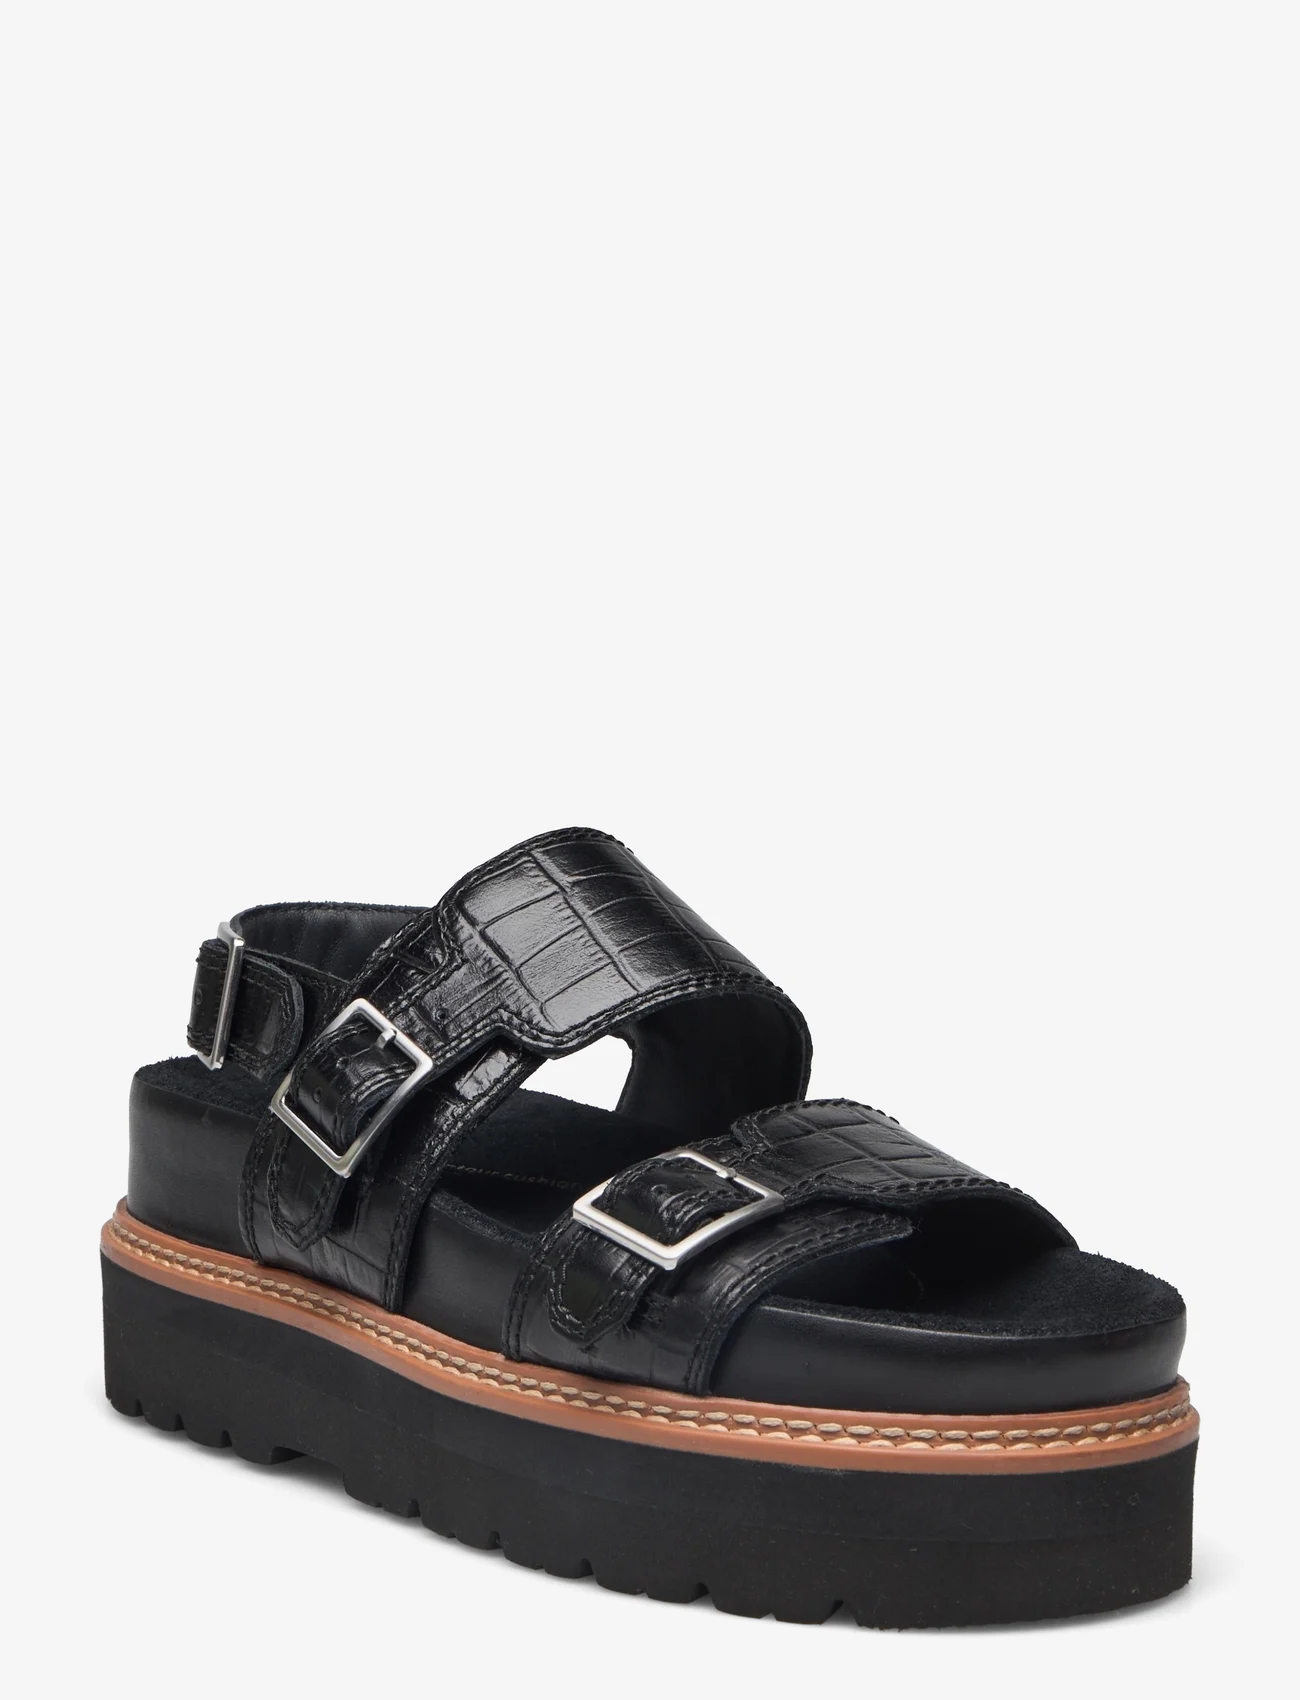 Clarks - Orianna Glide D - party wear at outlet prices - 1215 black interest - 0